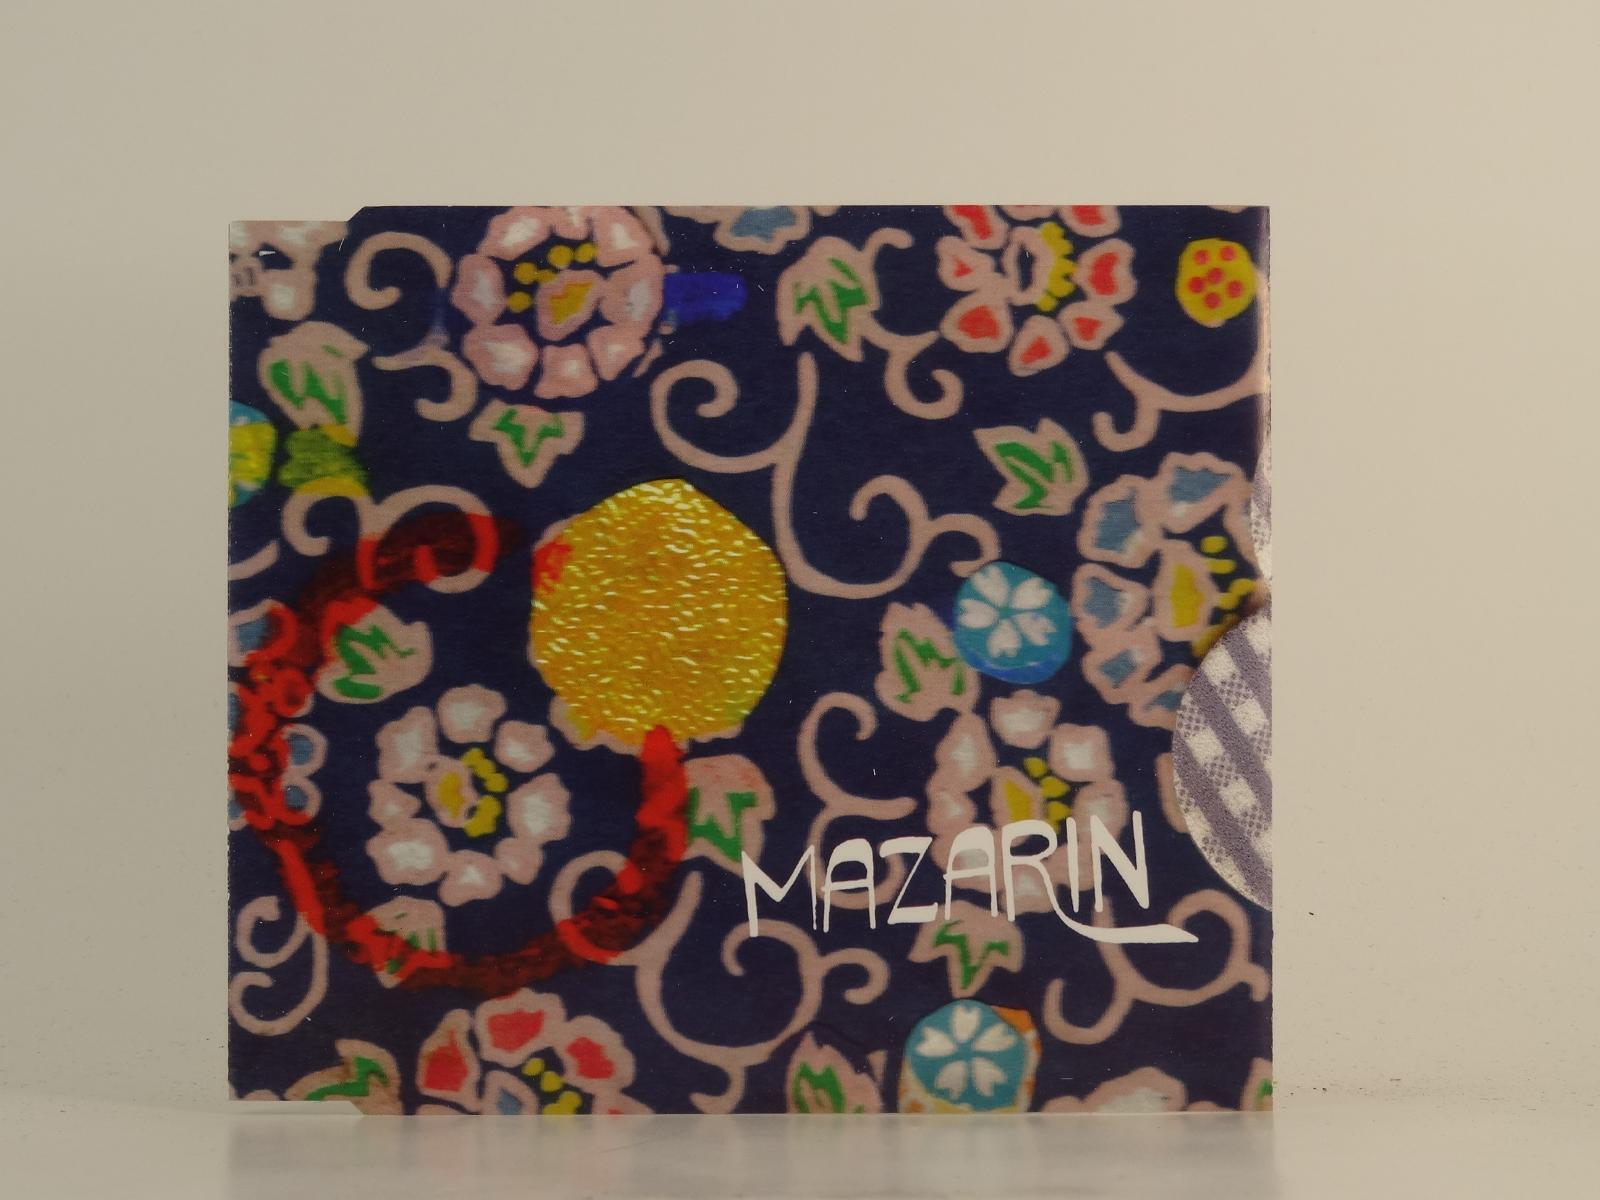 MAZARIN ANOTHER ONE GOES BY (H1) 2 Track CD Single Picture Sleeve BELLA UNION